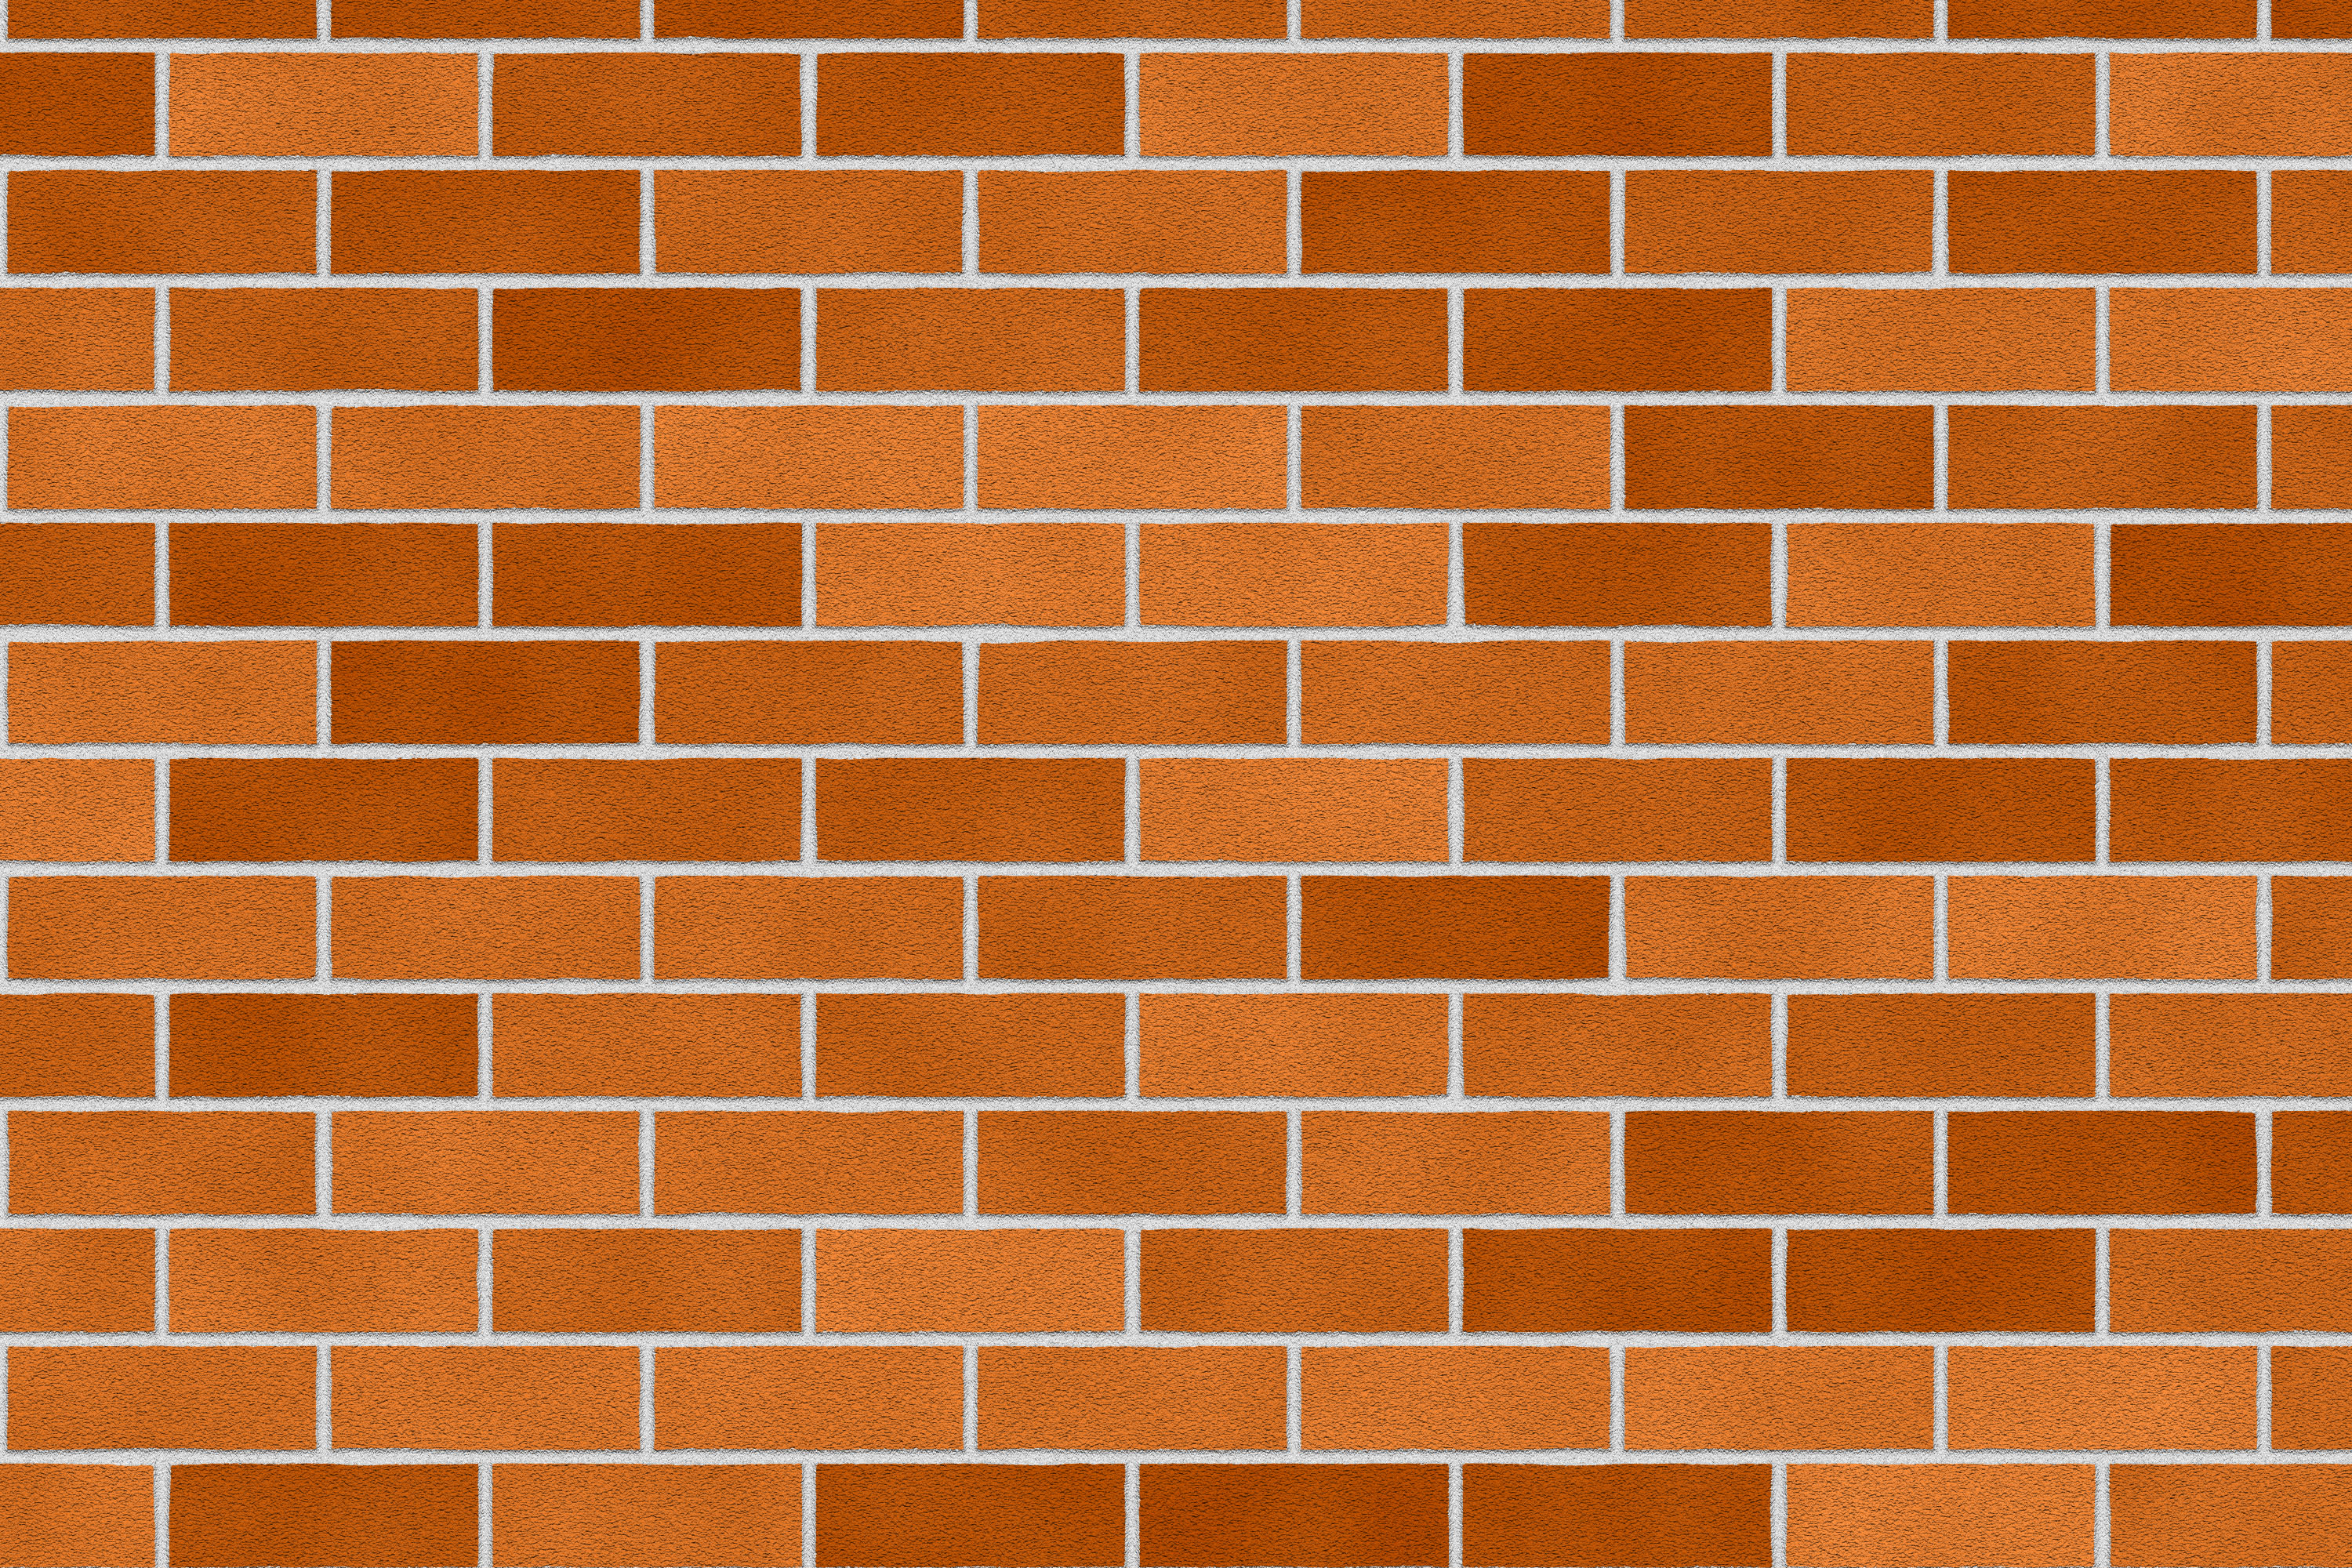 Abstract Brick Geometry Pattern Texture Wall 3000x2000